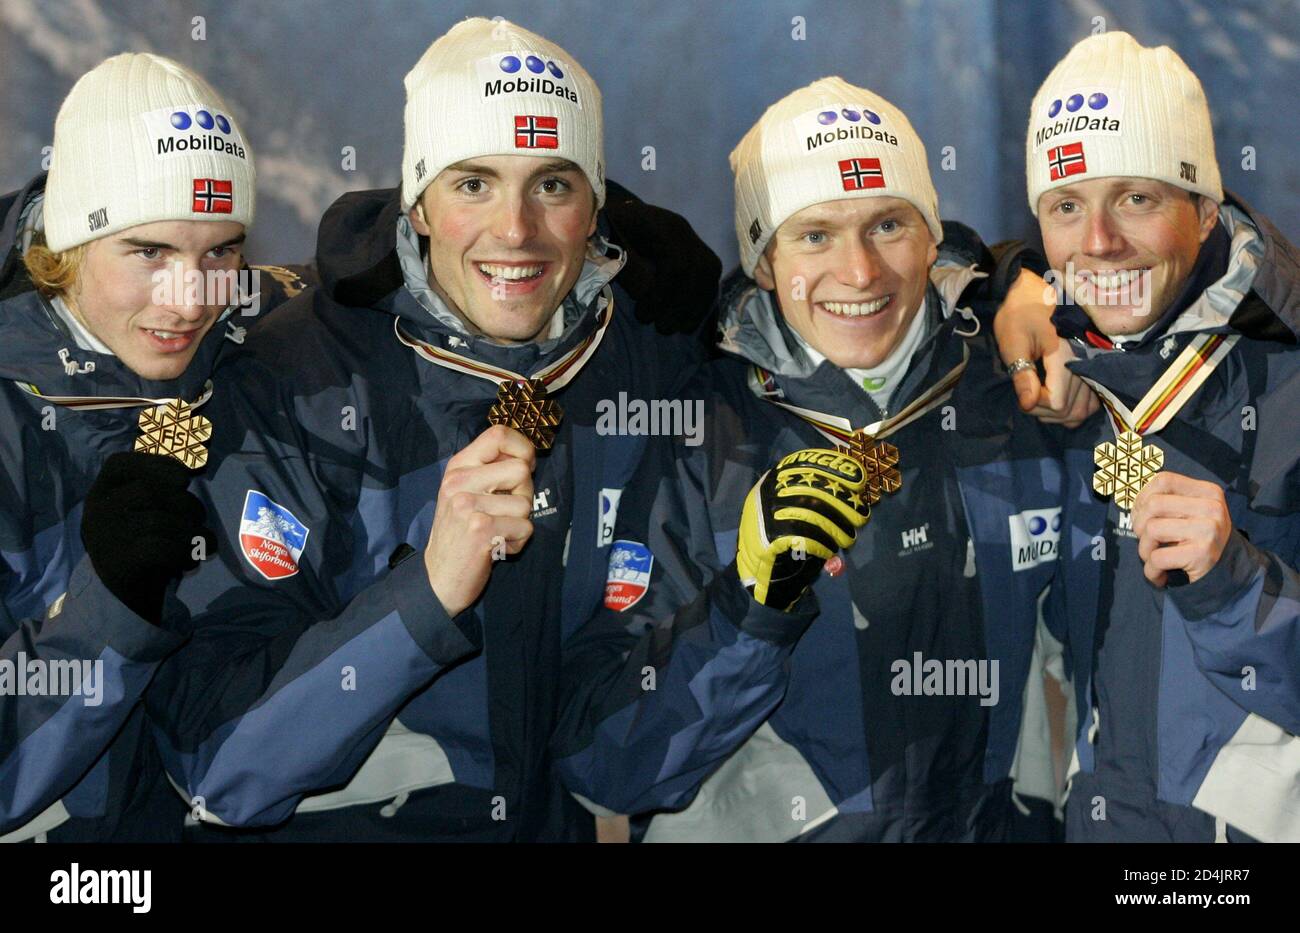 Norway's Petter Tande, Magnus Moan, Kristian Hammer and Havard Klemetsen  (L-R) present their gold medals after the Nordic Combined team competition  at the Nordic World Championships in Oberstdorf, southern Germany, February  23,